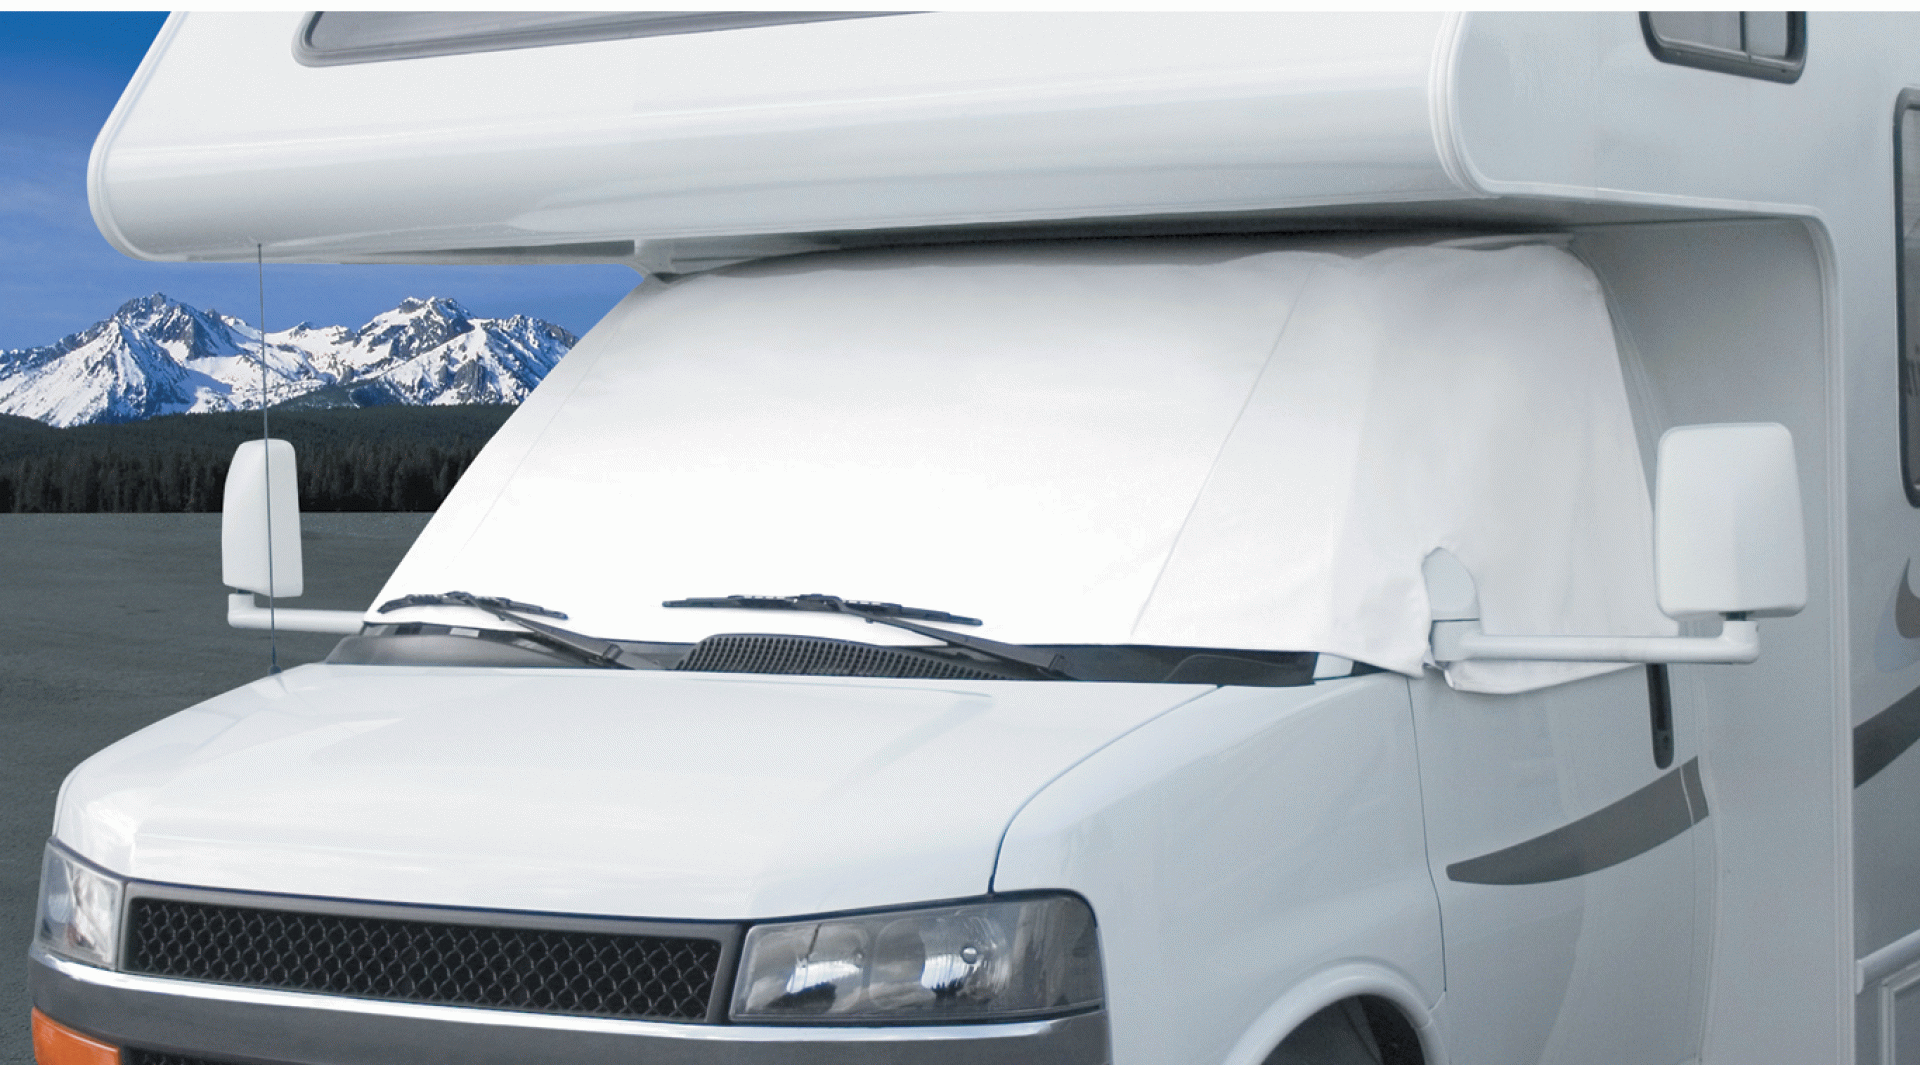 CLASSIC ACCESSORIES | 78634 | Windshield Cover Snow White Ford '04 - 15' w/Mirror cut out